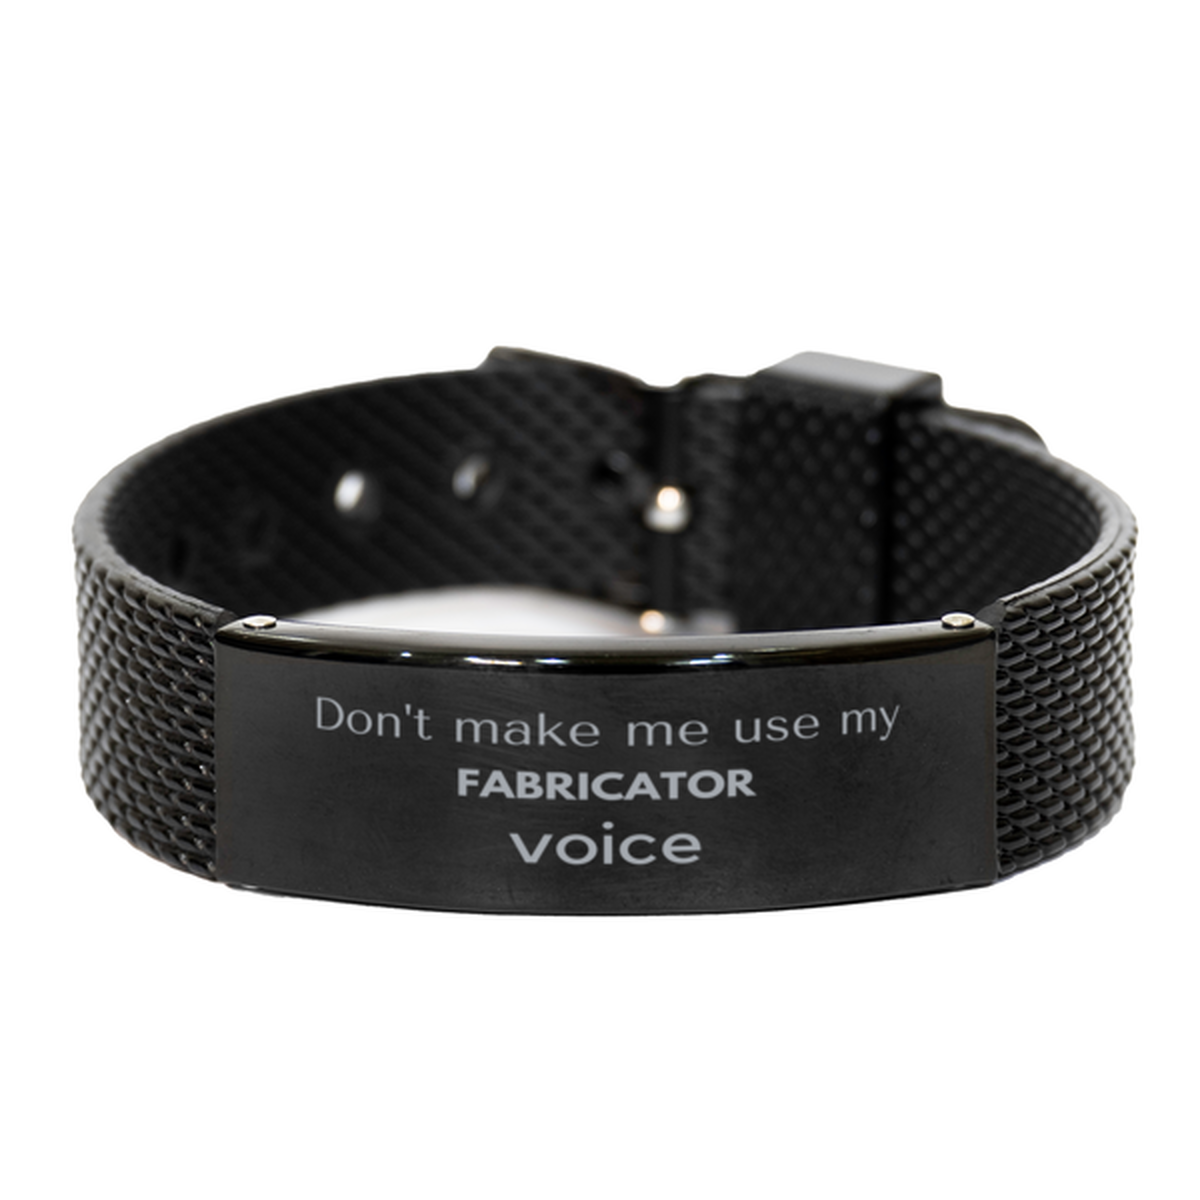 Don't make me use my Fabricator voice, Sarcasm Fabricator Gifts, Christmas Fabricator Black Shark Mesh Bracelet Birthday Unique Gifts For Fabricator Coworkers, Men, Women, Colleague, Friends